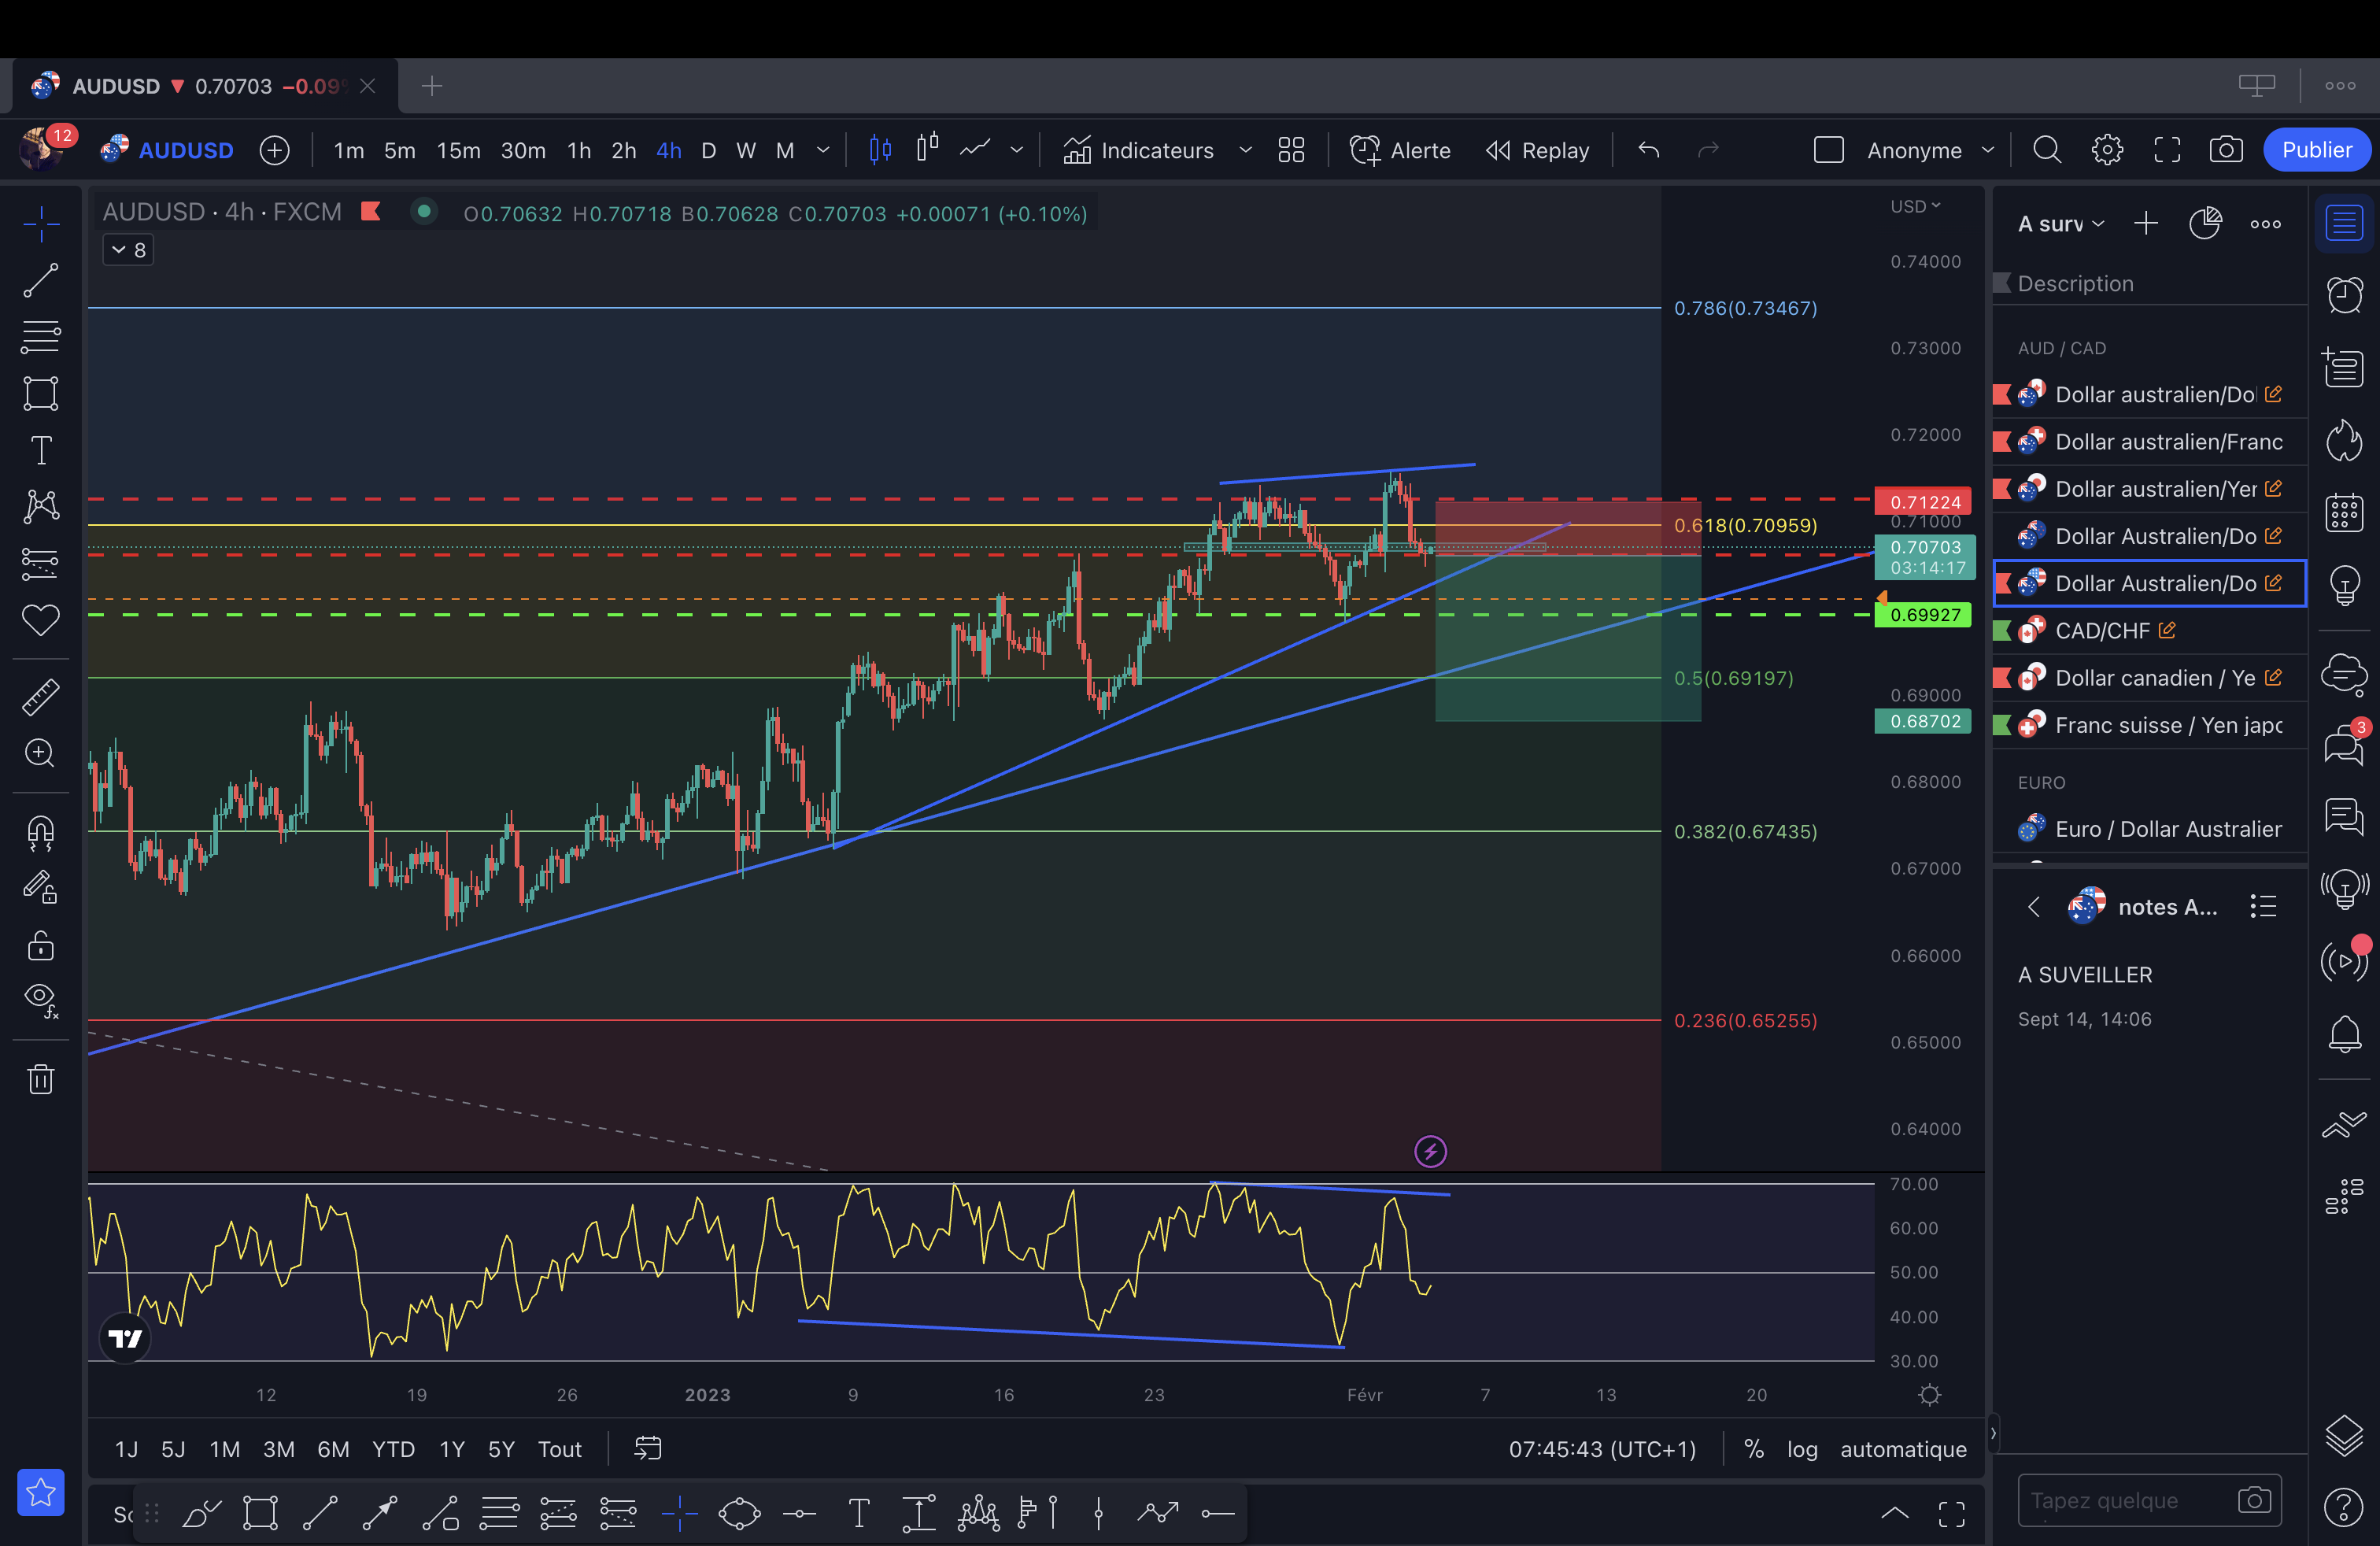 AUD/USD H4 supply and demand